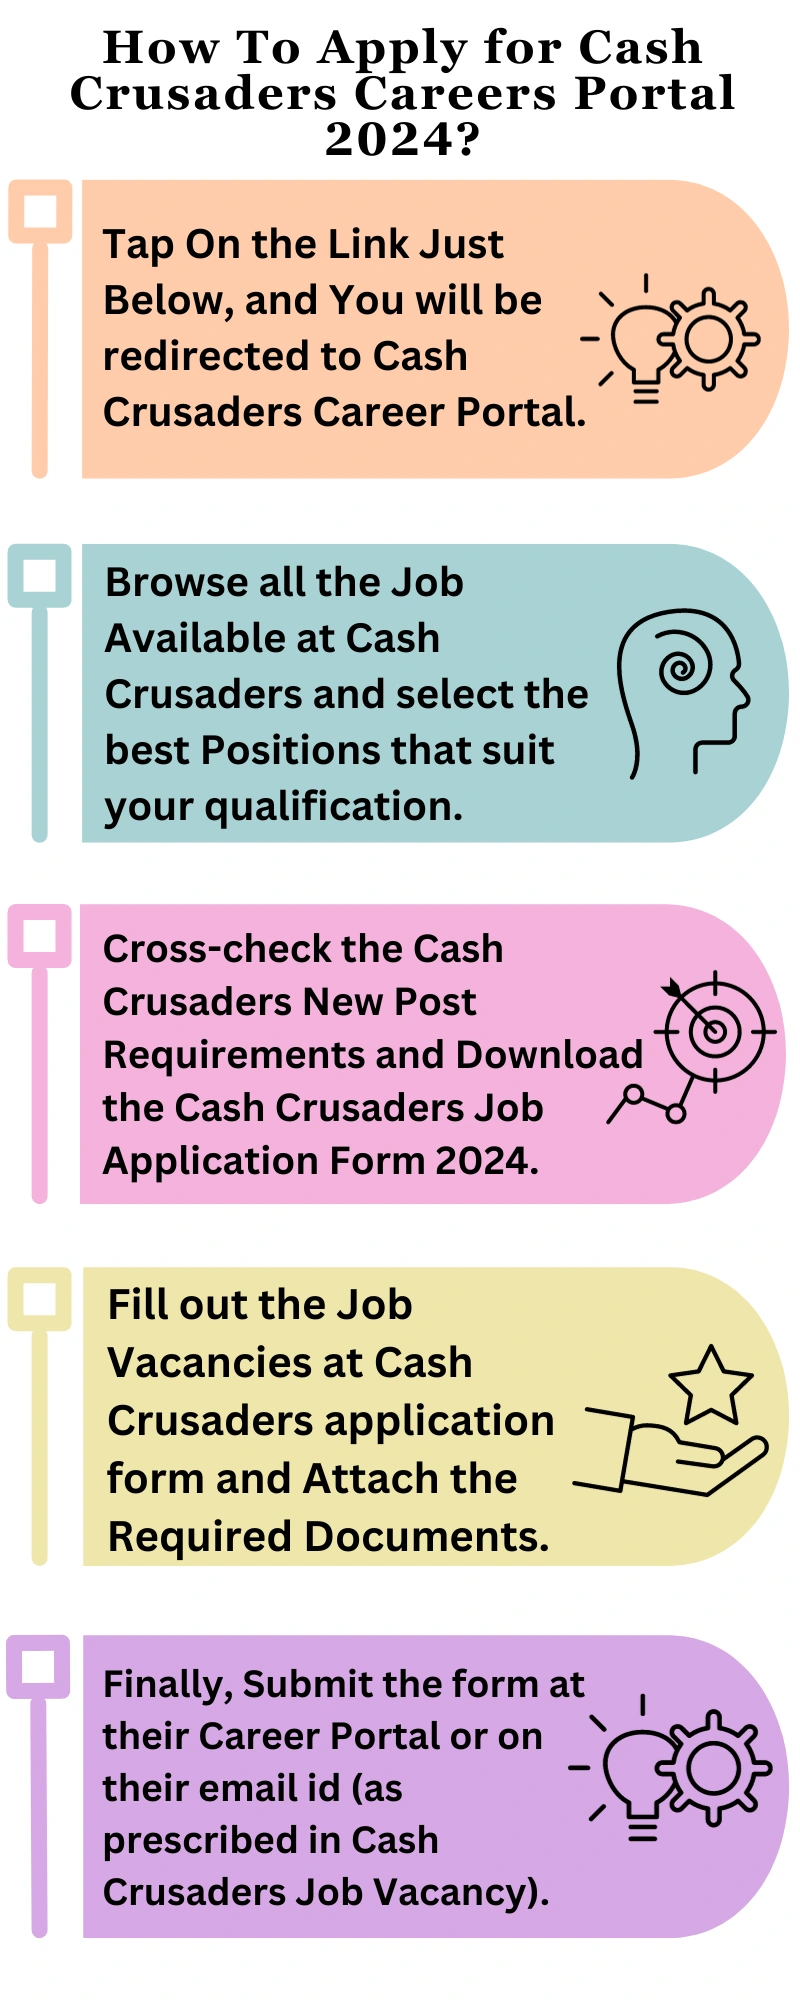 How To Apply for Cash Crusaders Careers Portal 2024?